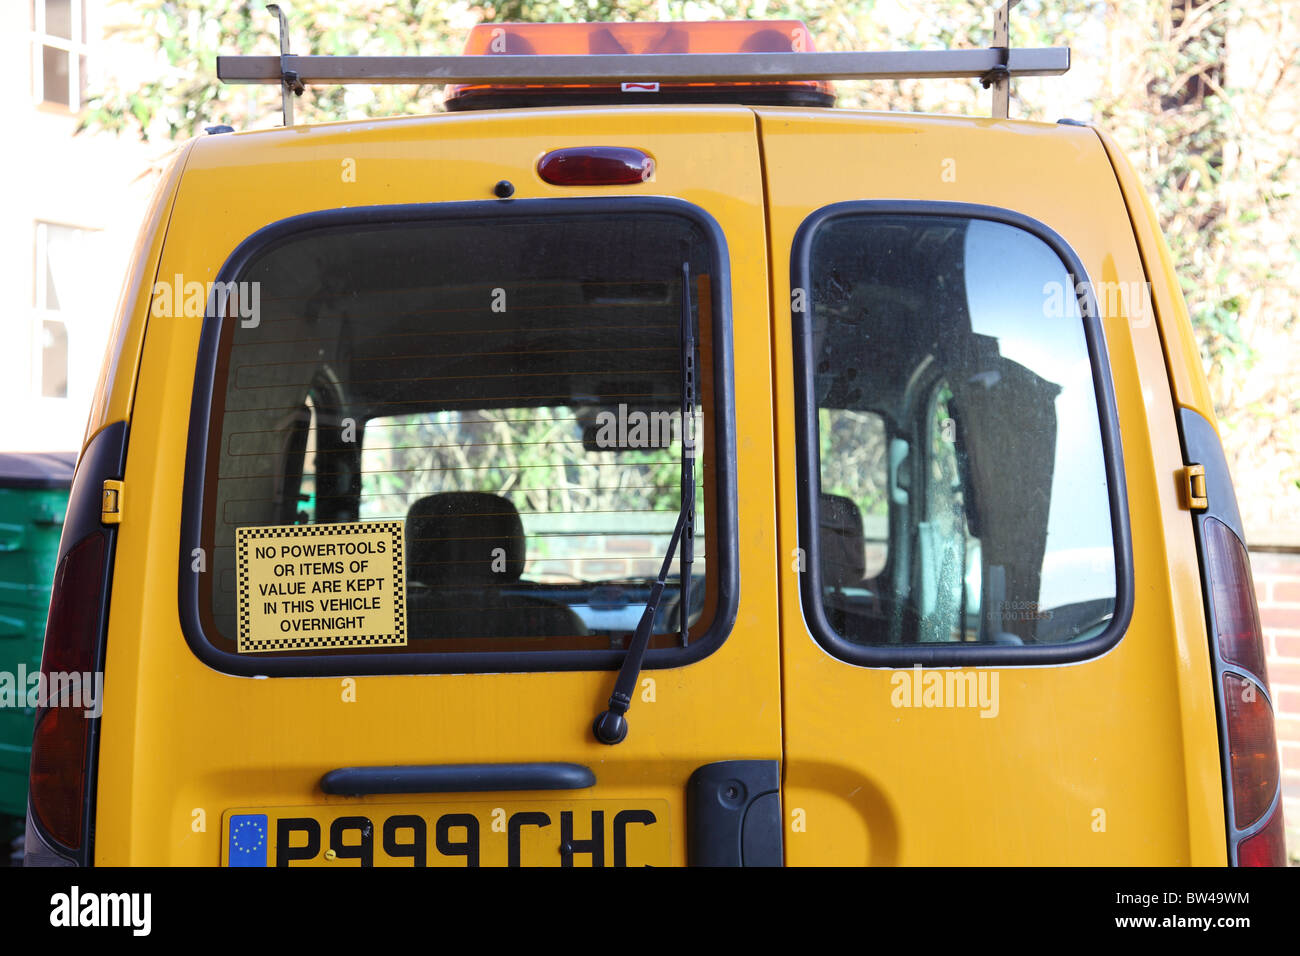 A 'no power tools left in vehicle' sign on a commercial vehicle in the U.K. Stock Photo